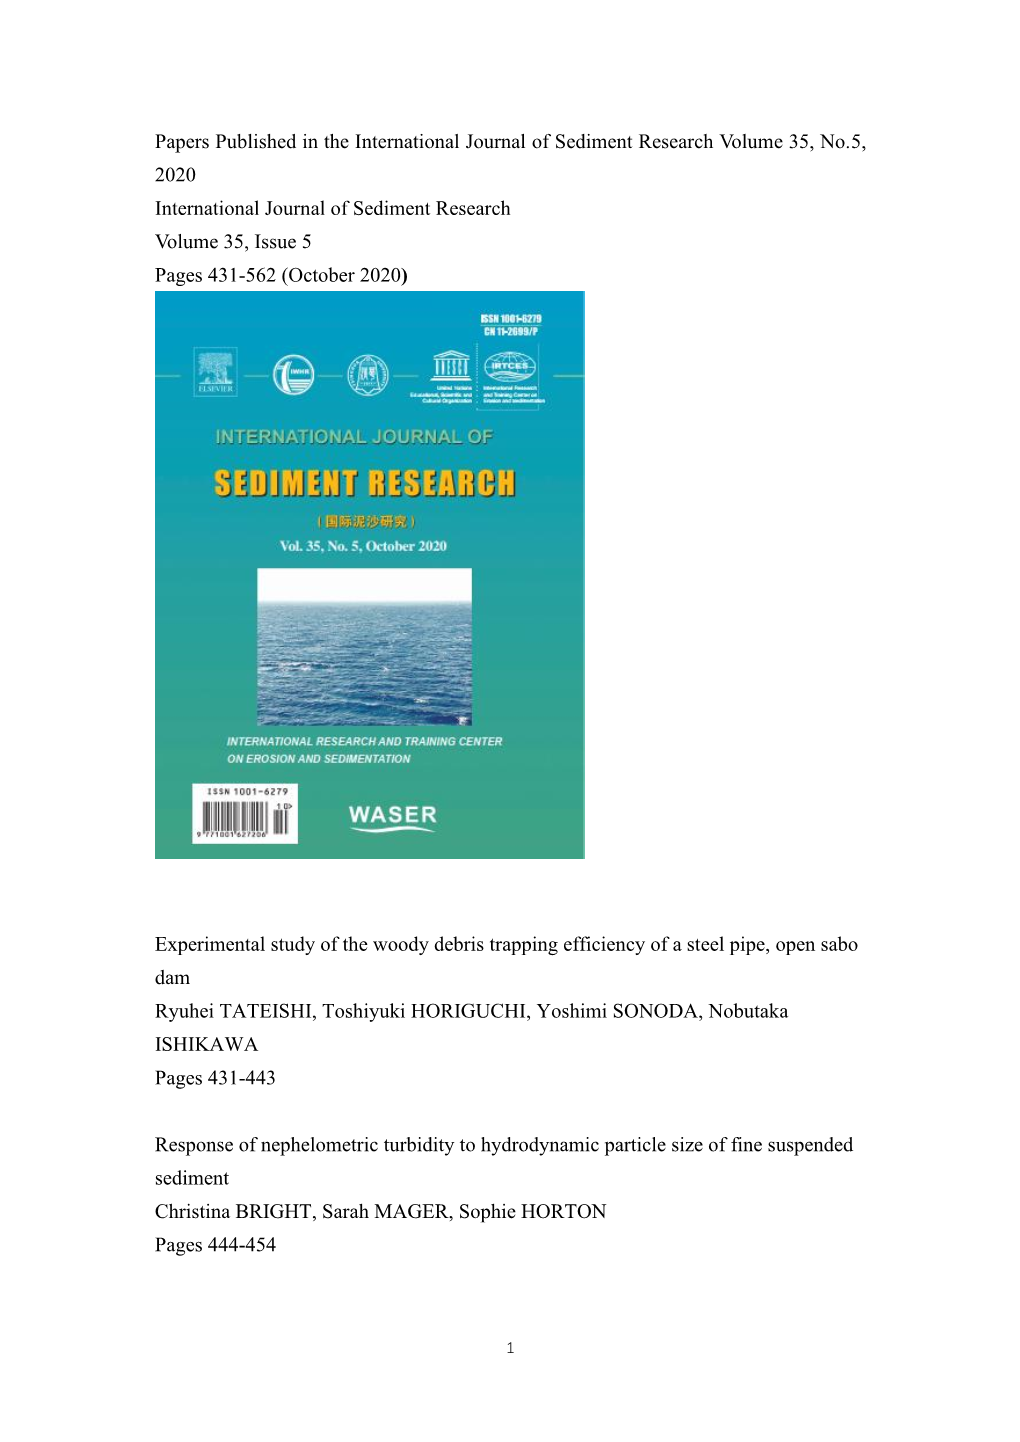 Papers Published in the International Journal of Sediment Research Volume 35, No.5, 2020 International Journal of Sediment Resea